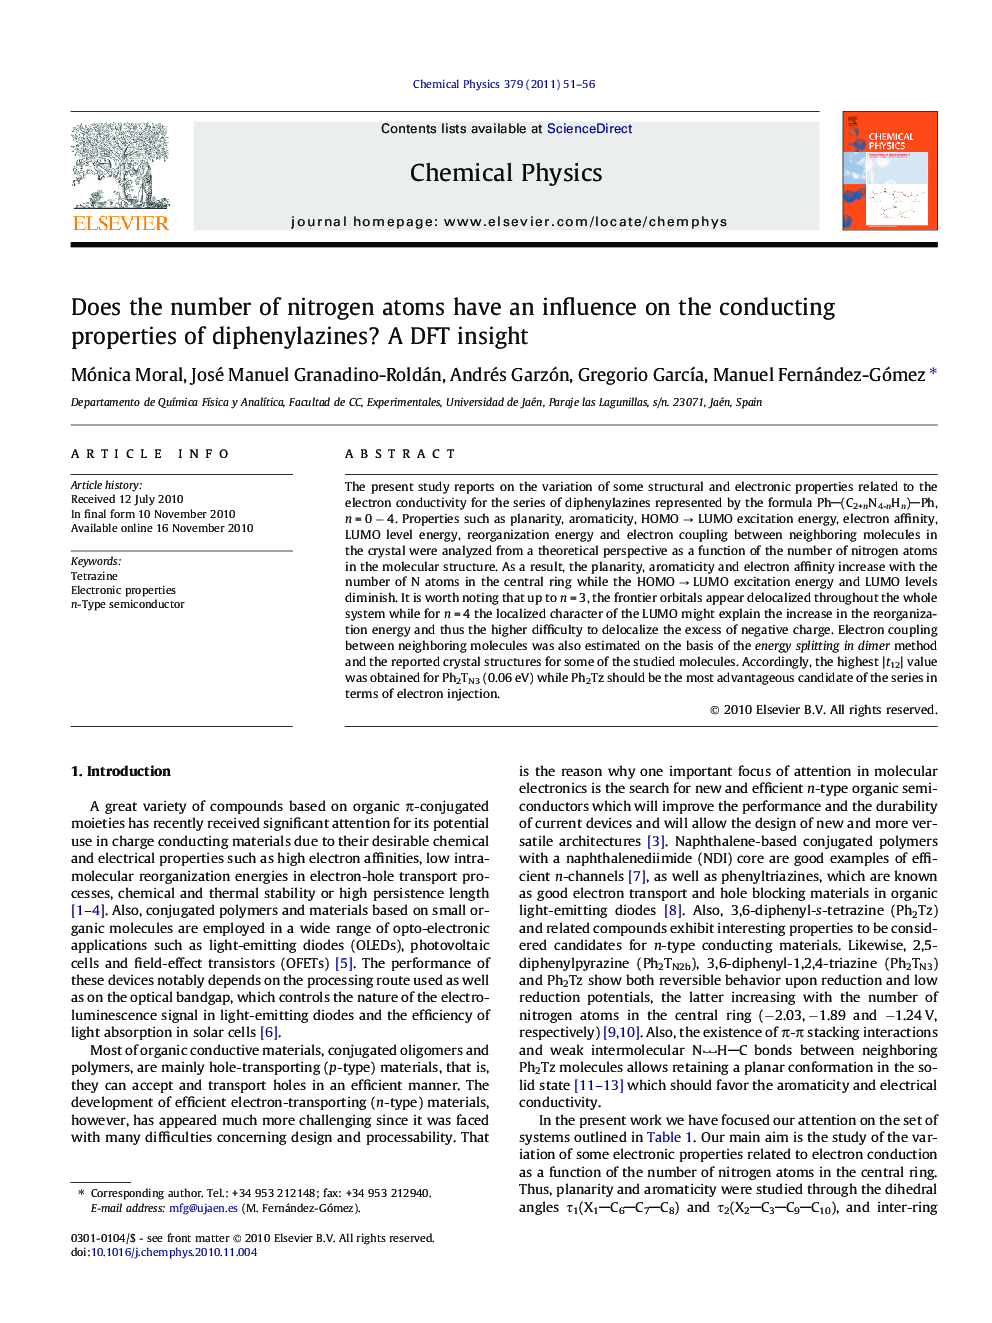 Does the number of nitrogen atoms have an influence on the conducting properties of diphenylazines? A DFT insight